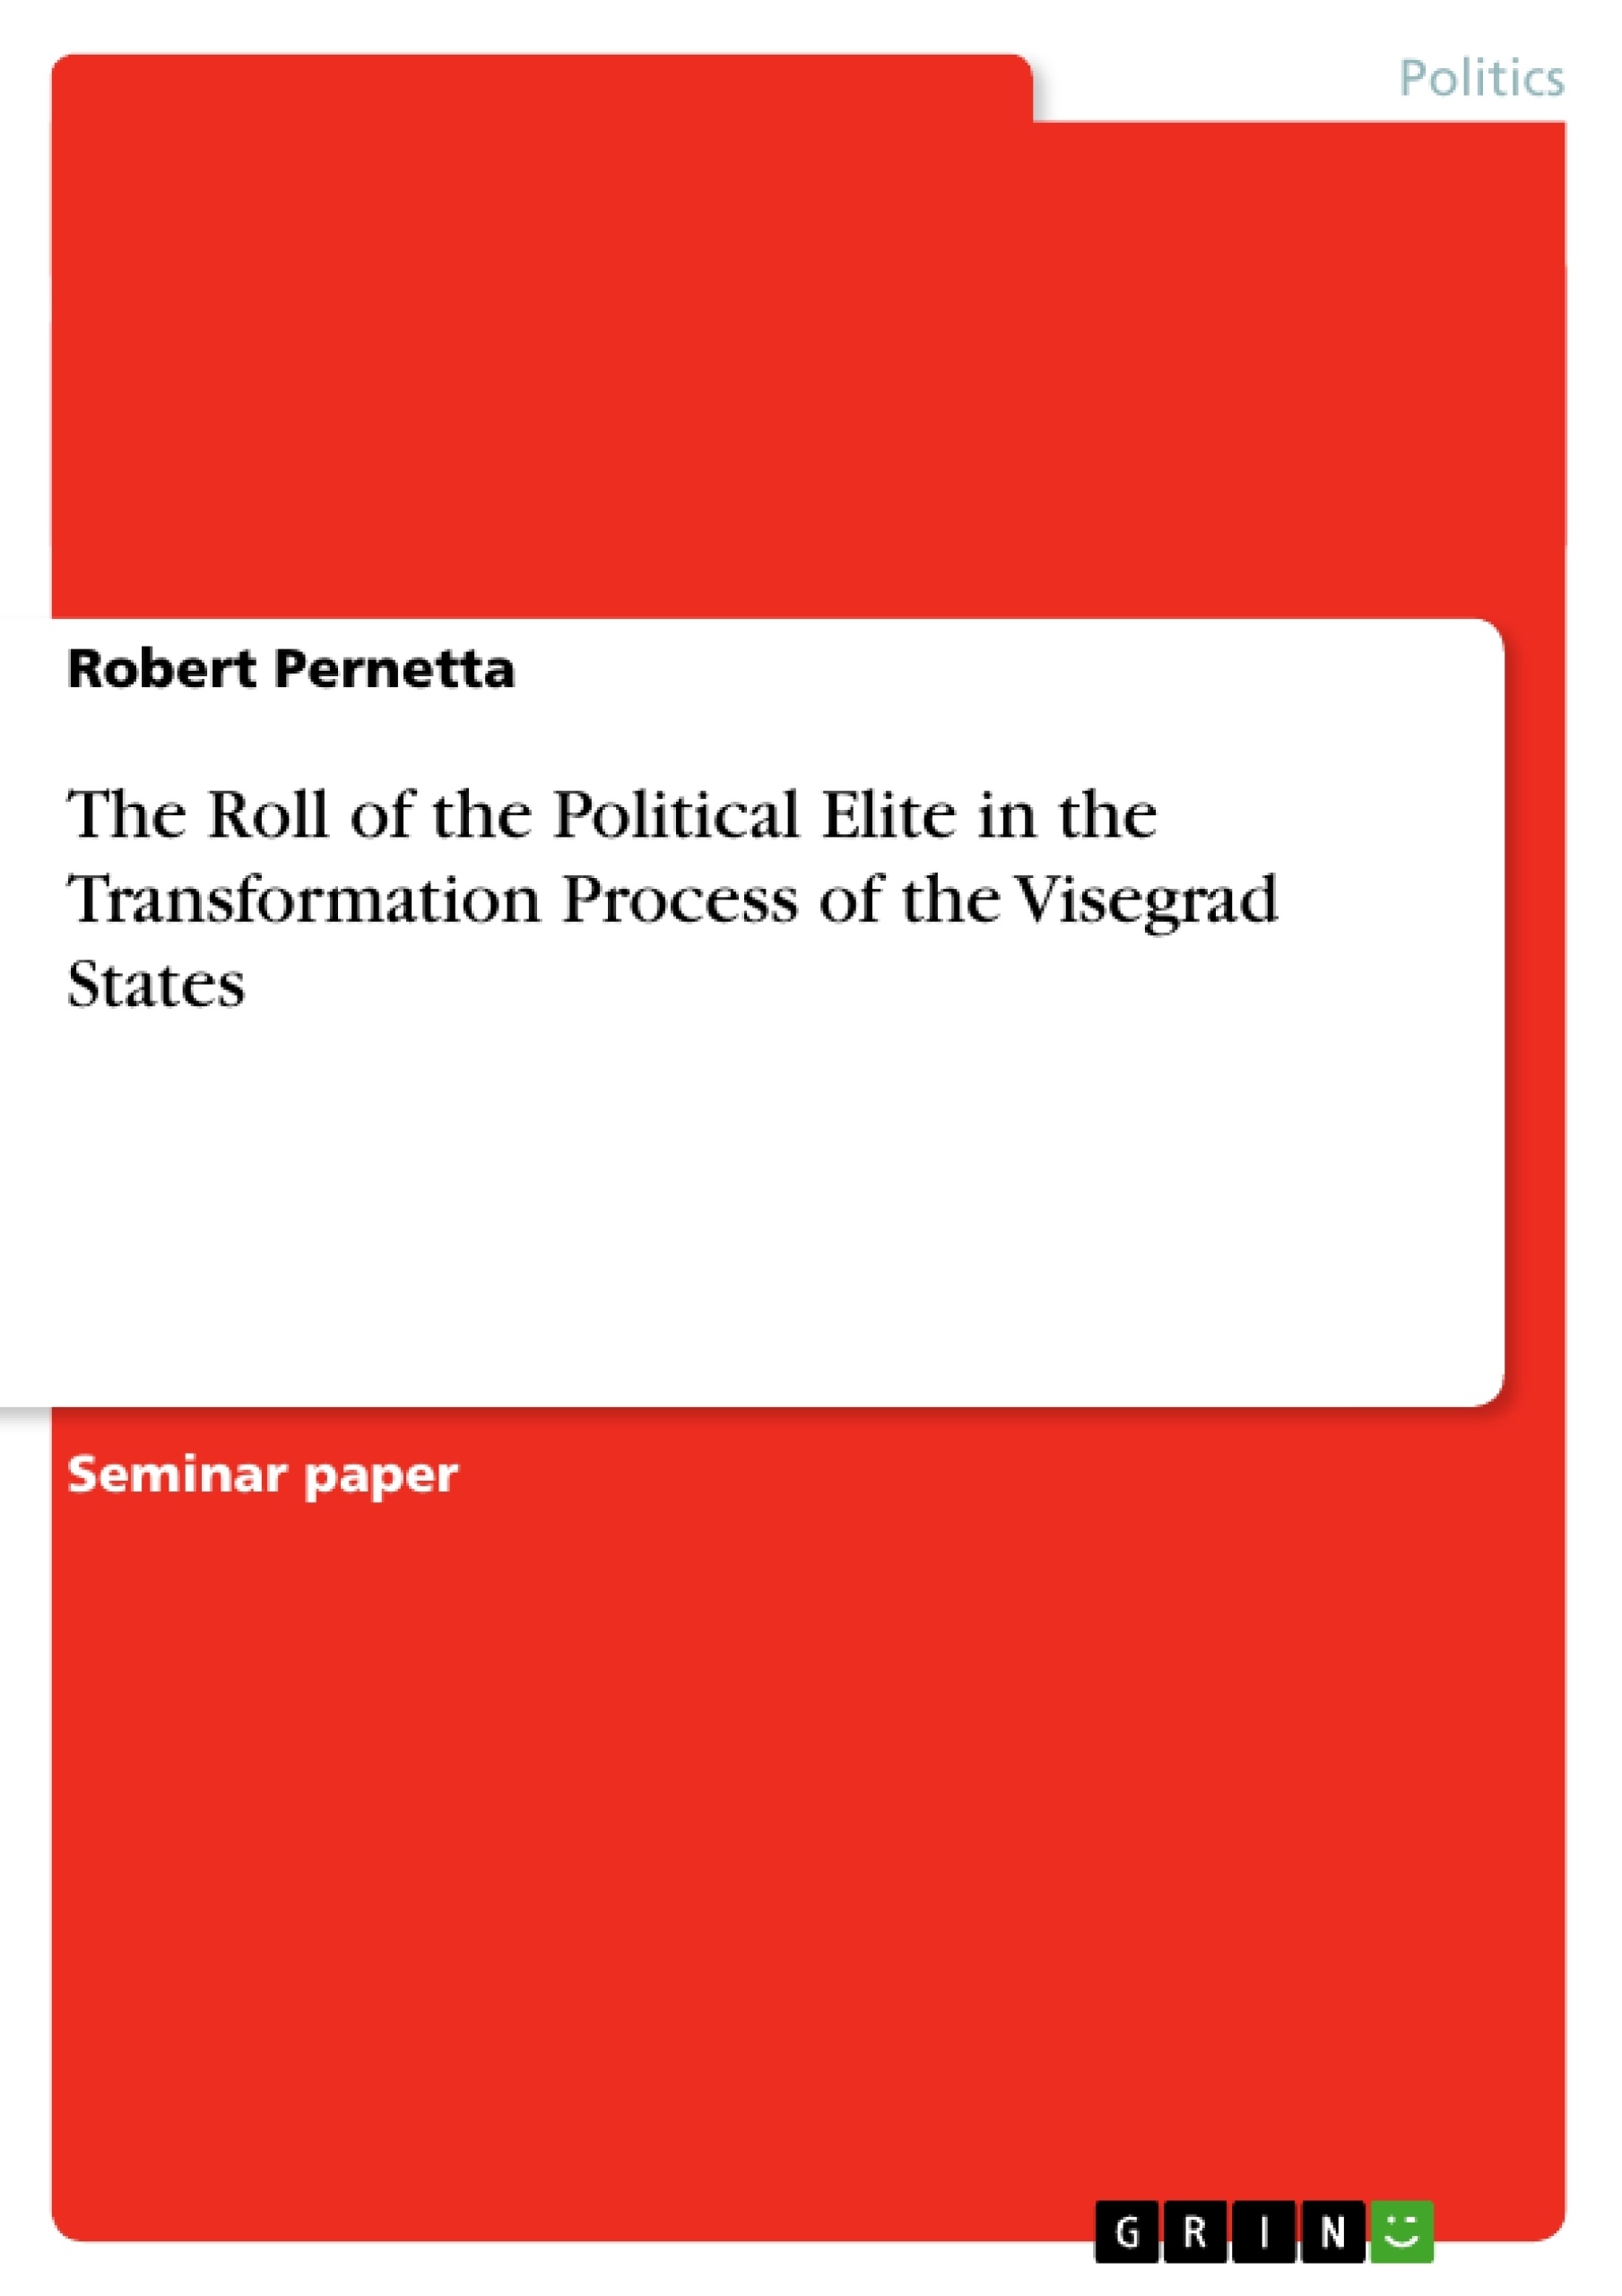 Title: The Roll of the Political Elite in the Transformation Process of the Visegrad States